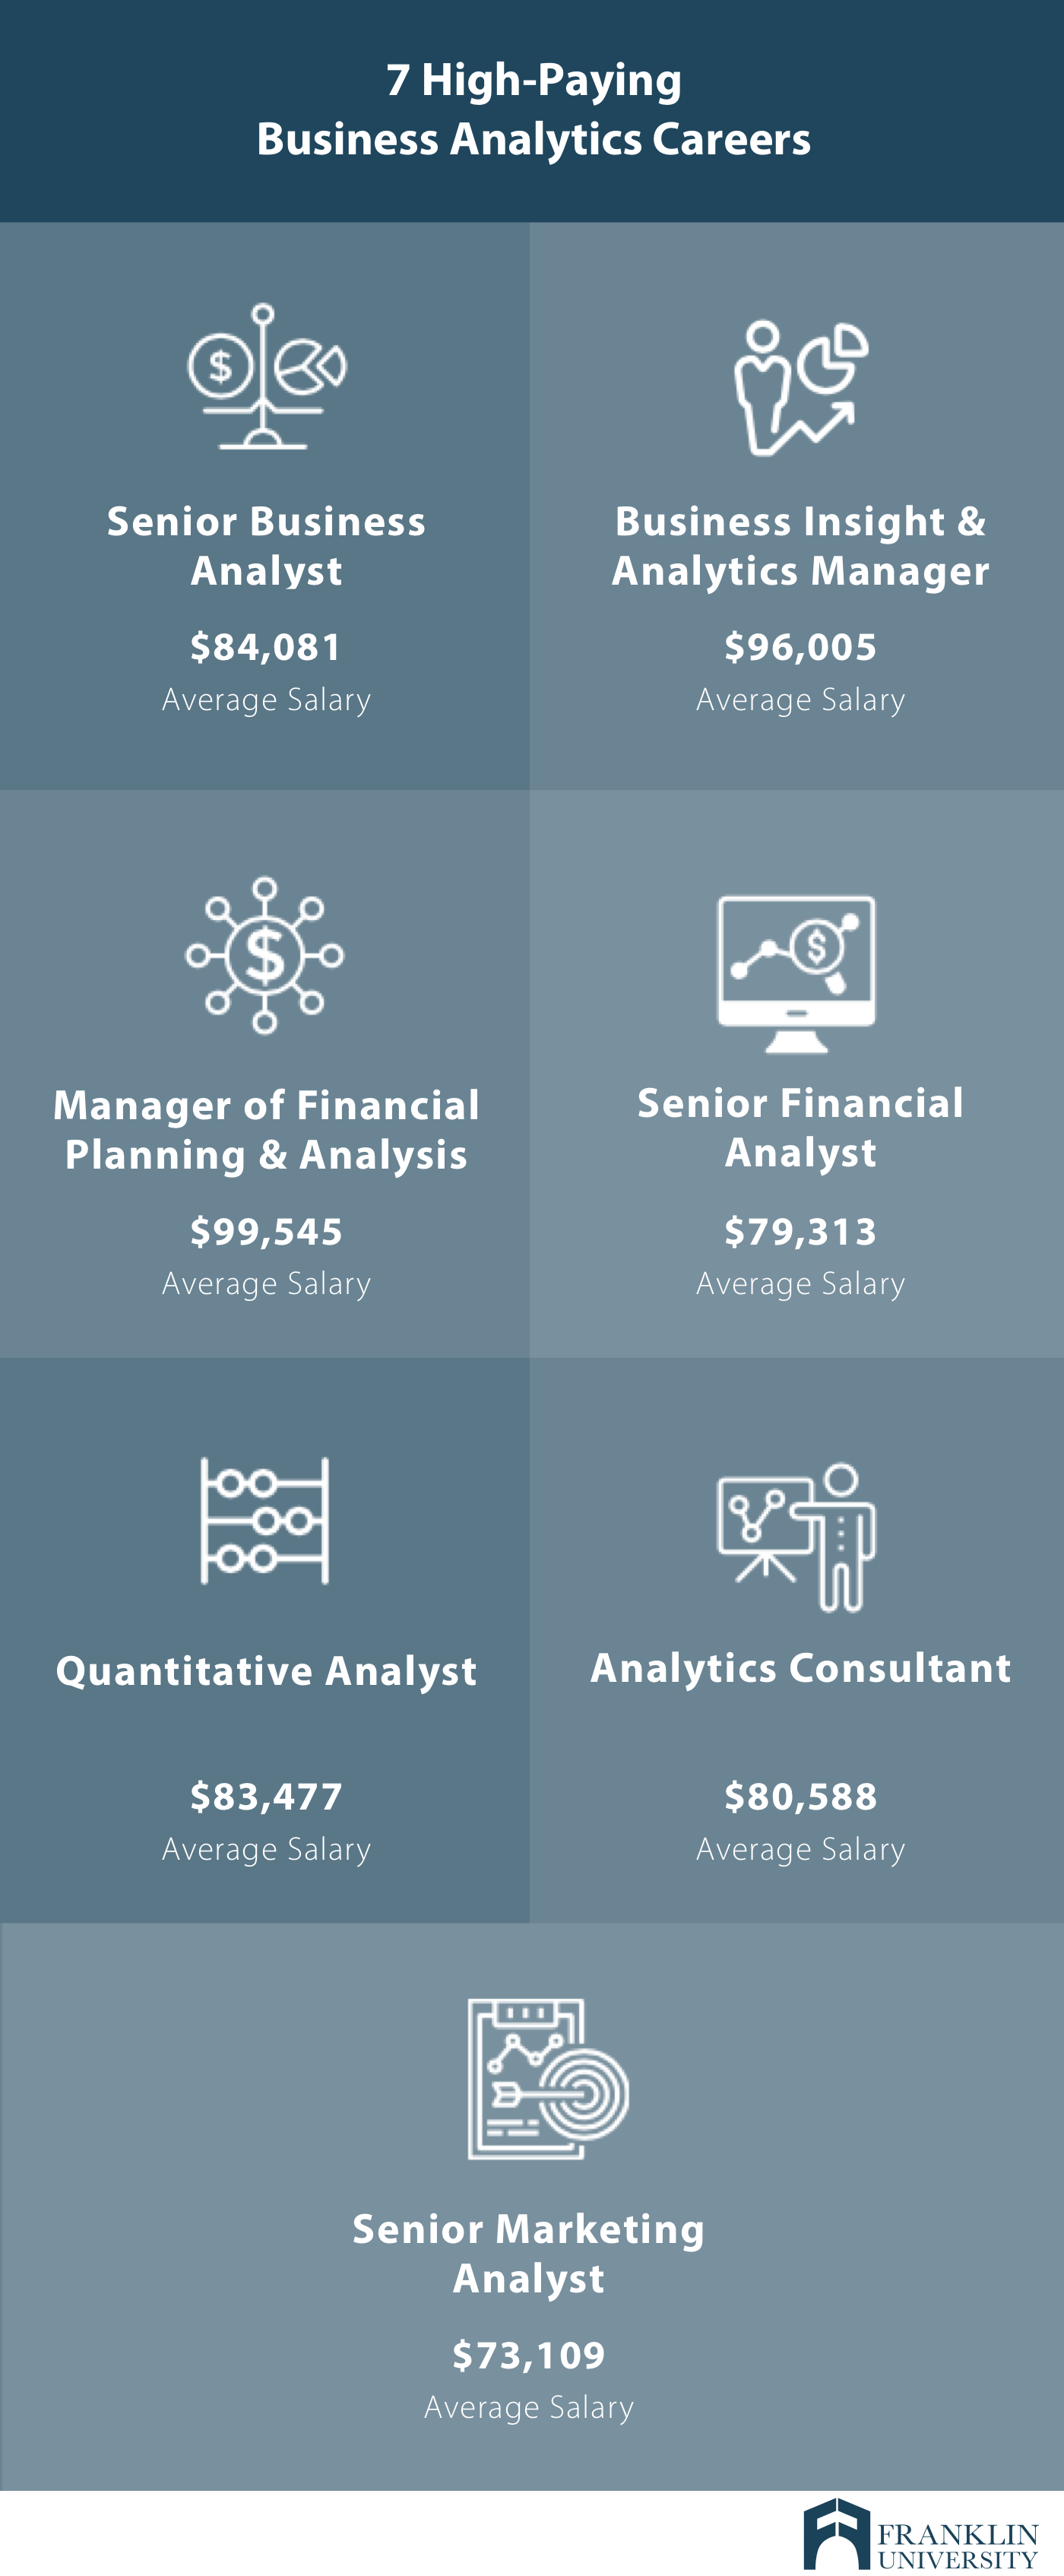 masters in business analytics salary - College Learners